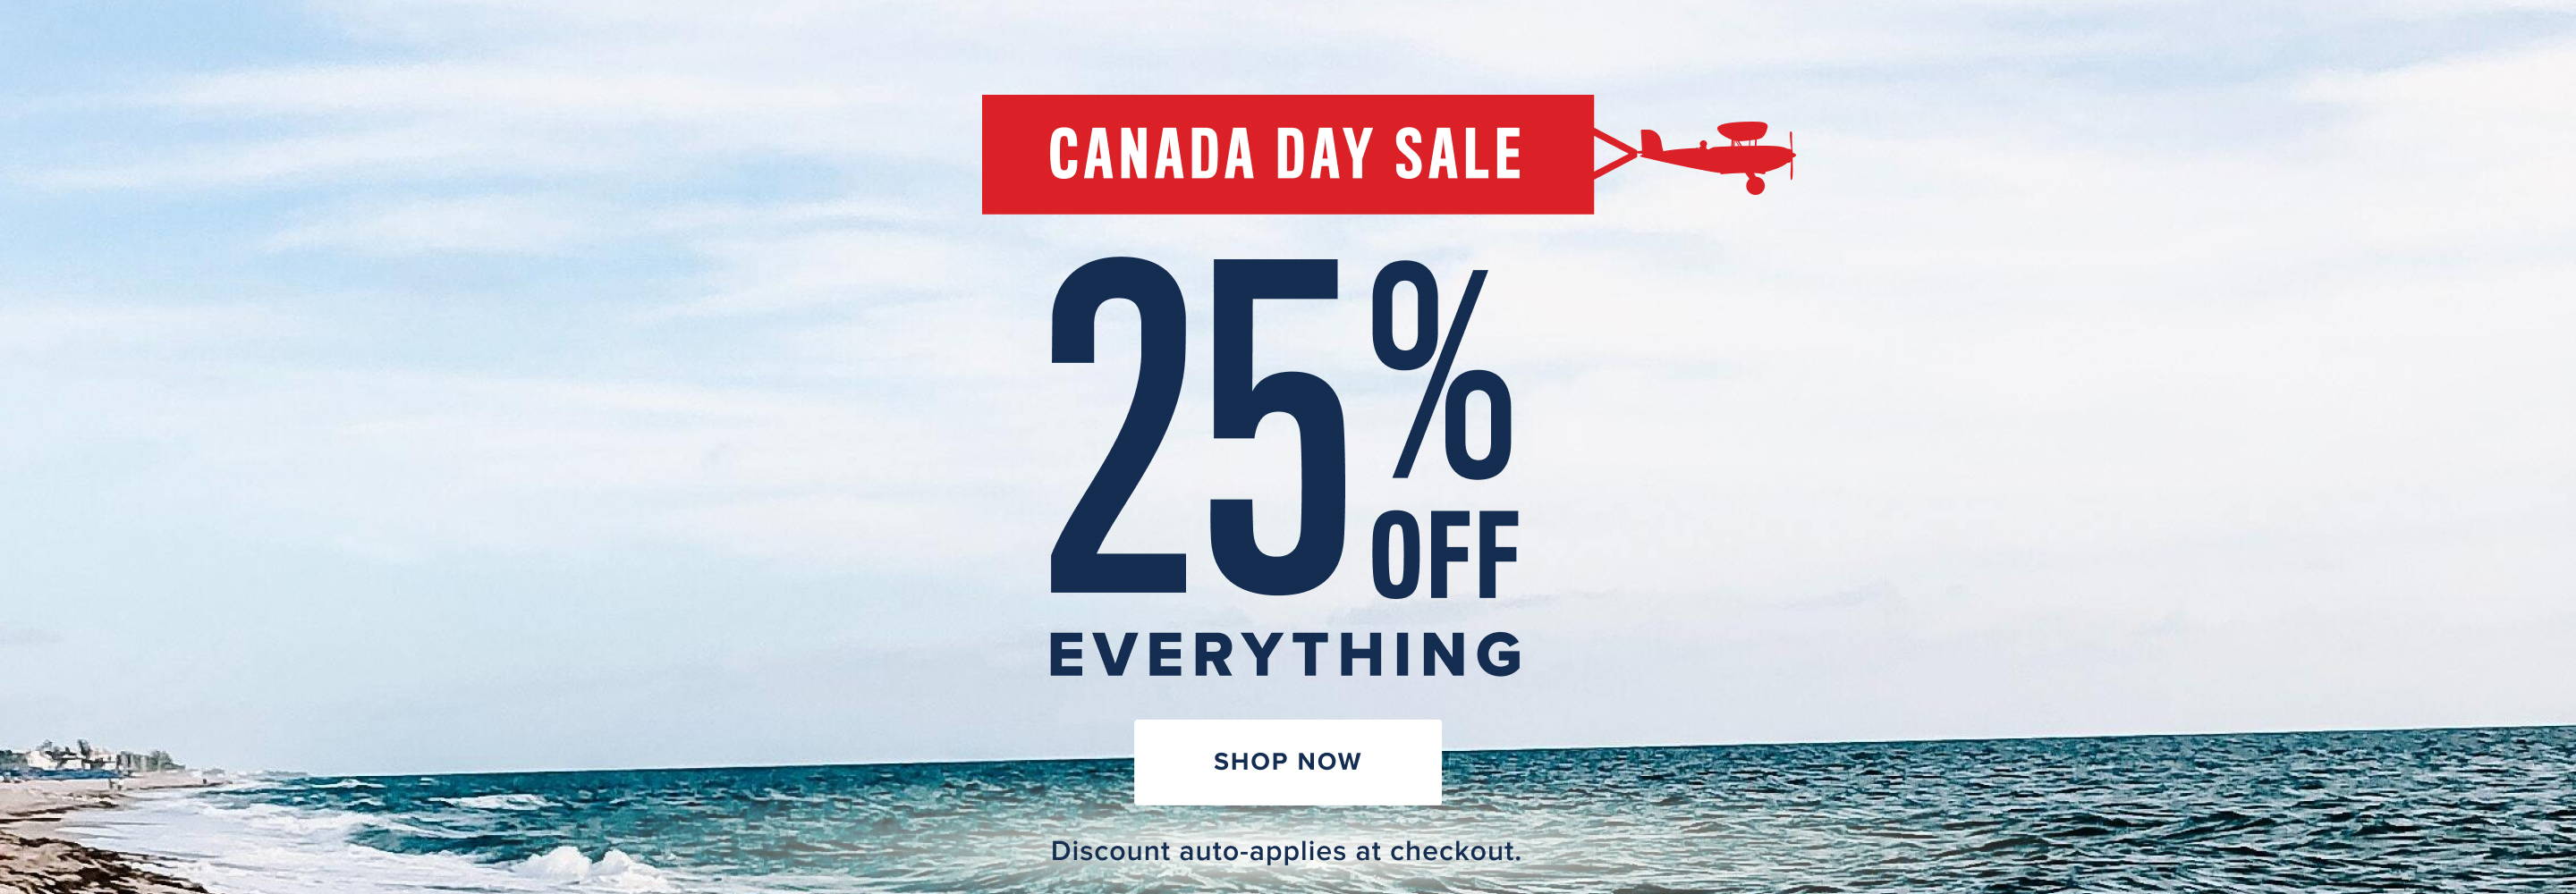 Canada Day Sale 25% Off Everything. 